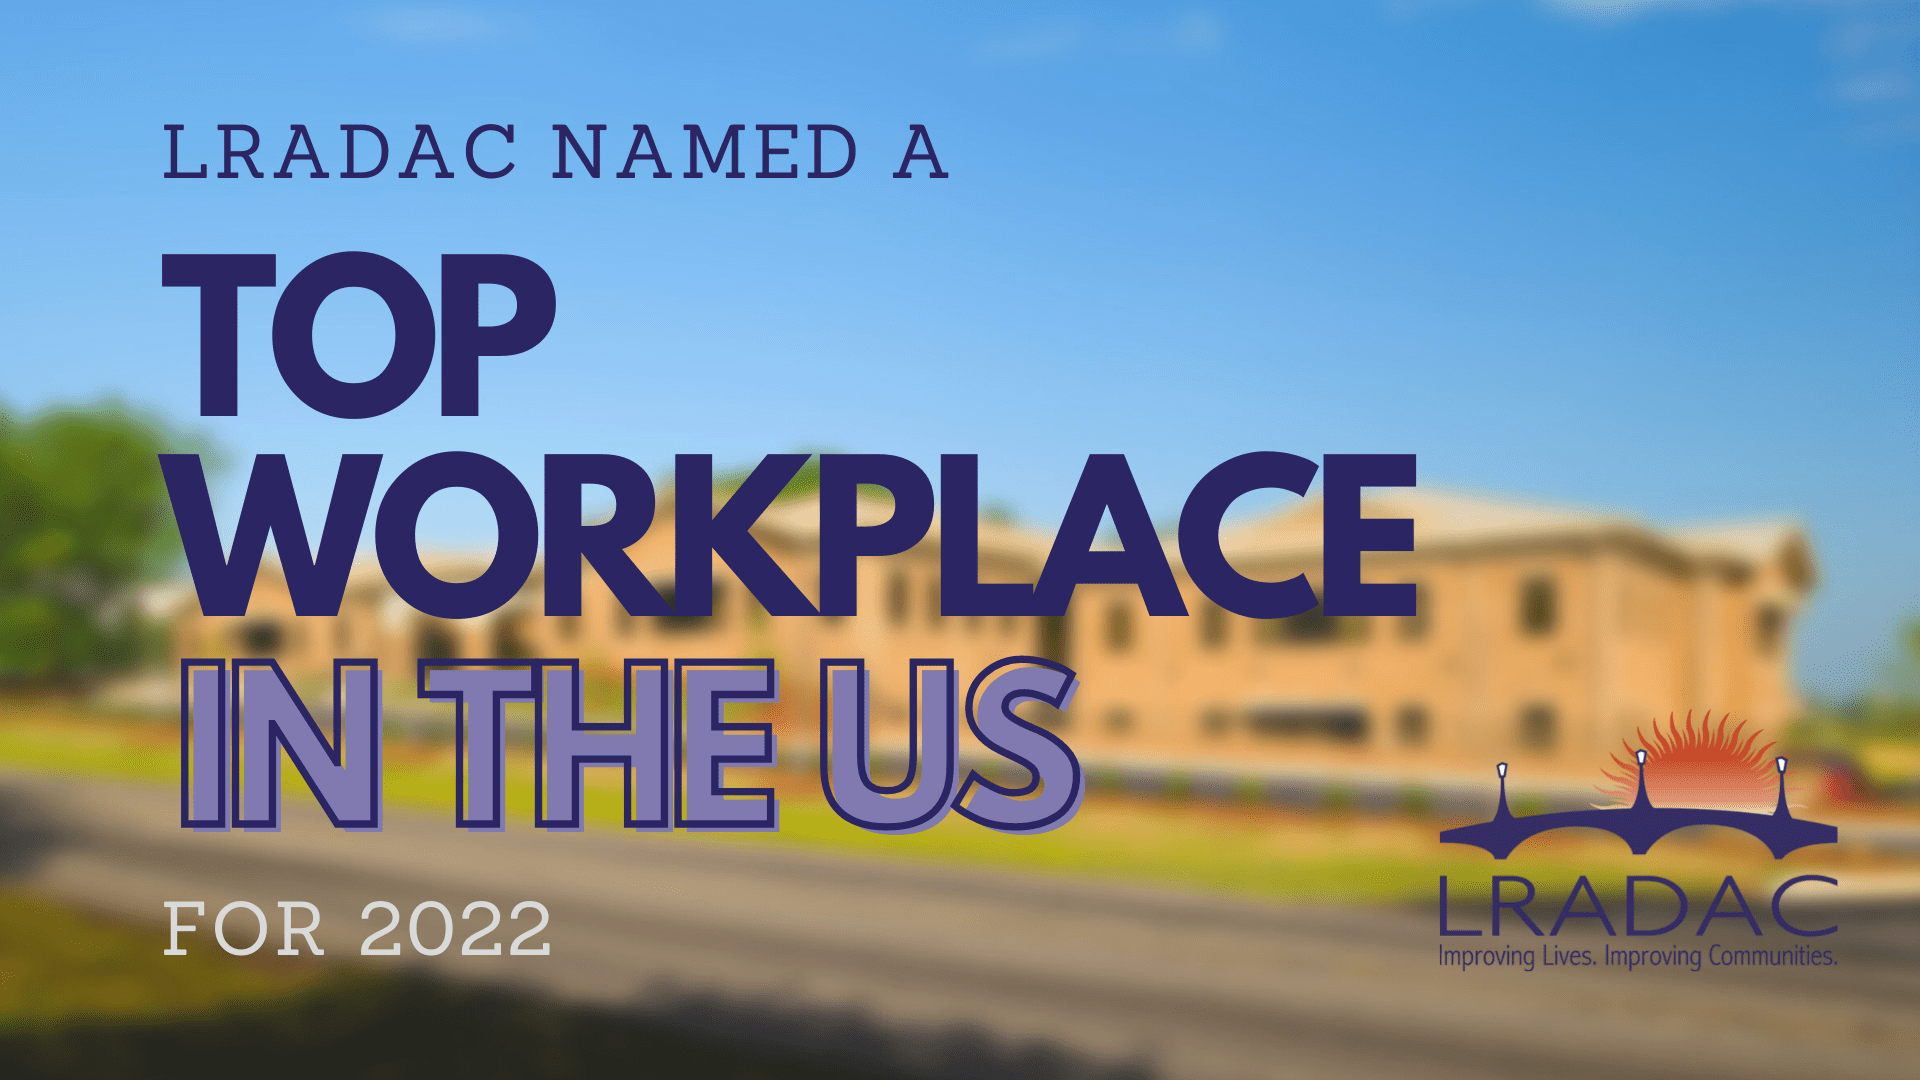 LRADAC Named a Top USA Workplace for 2022